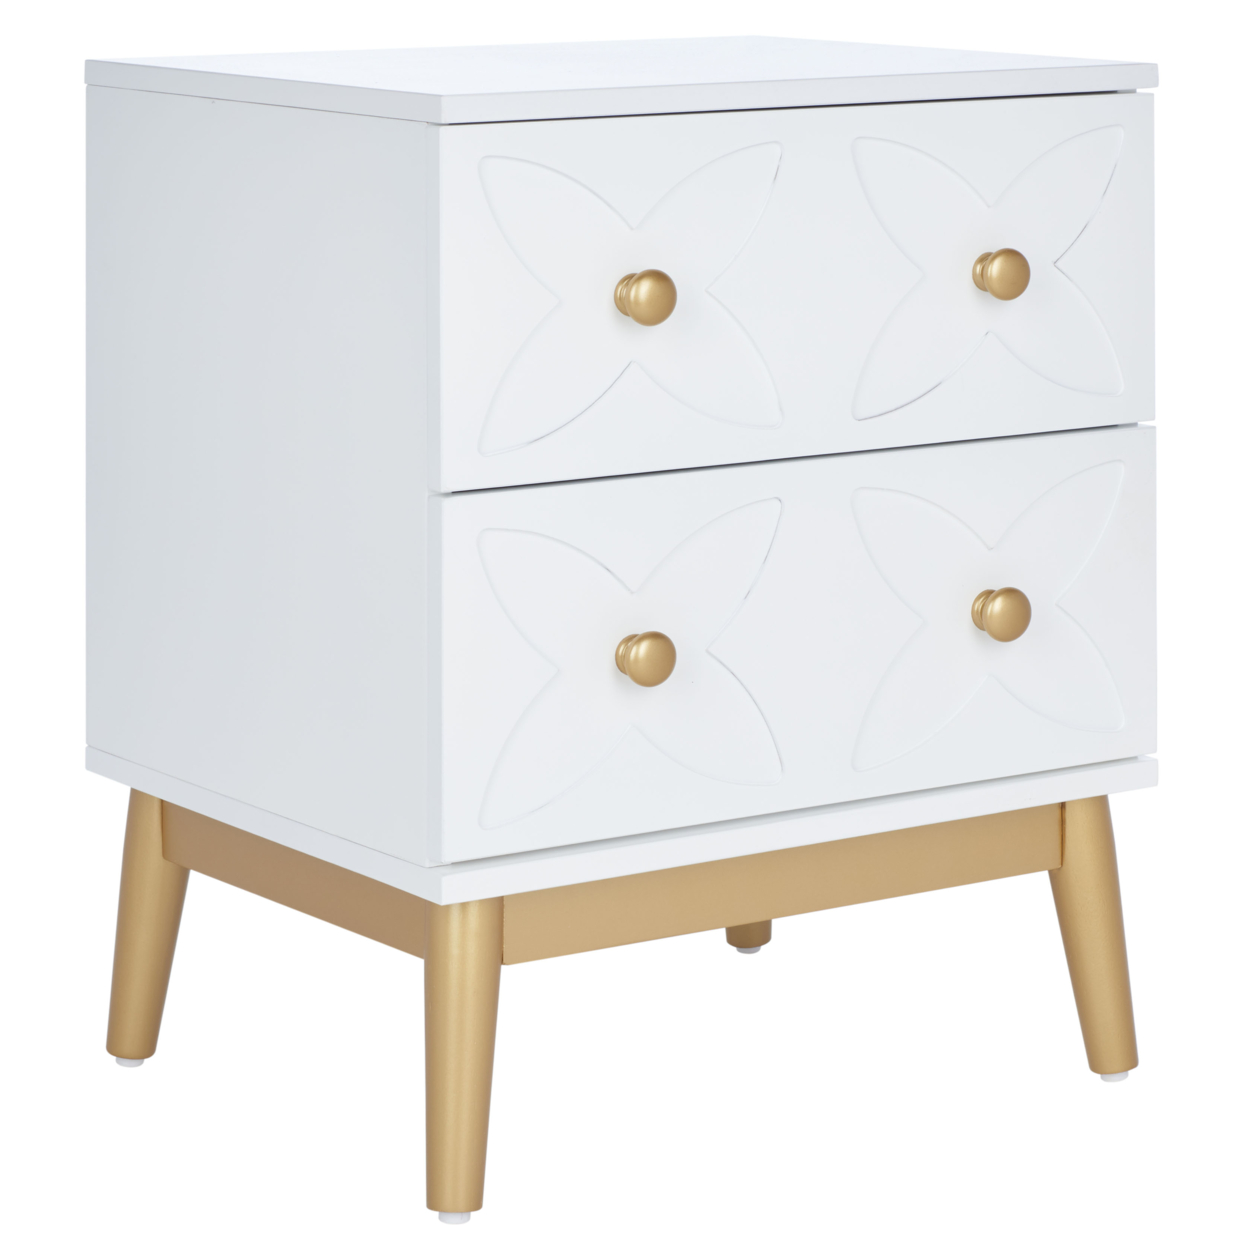 SAFAVIEH Ottoline 2-Drawer Patterned Night Stand White / Gold